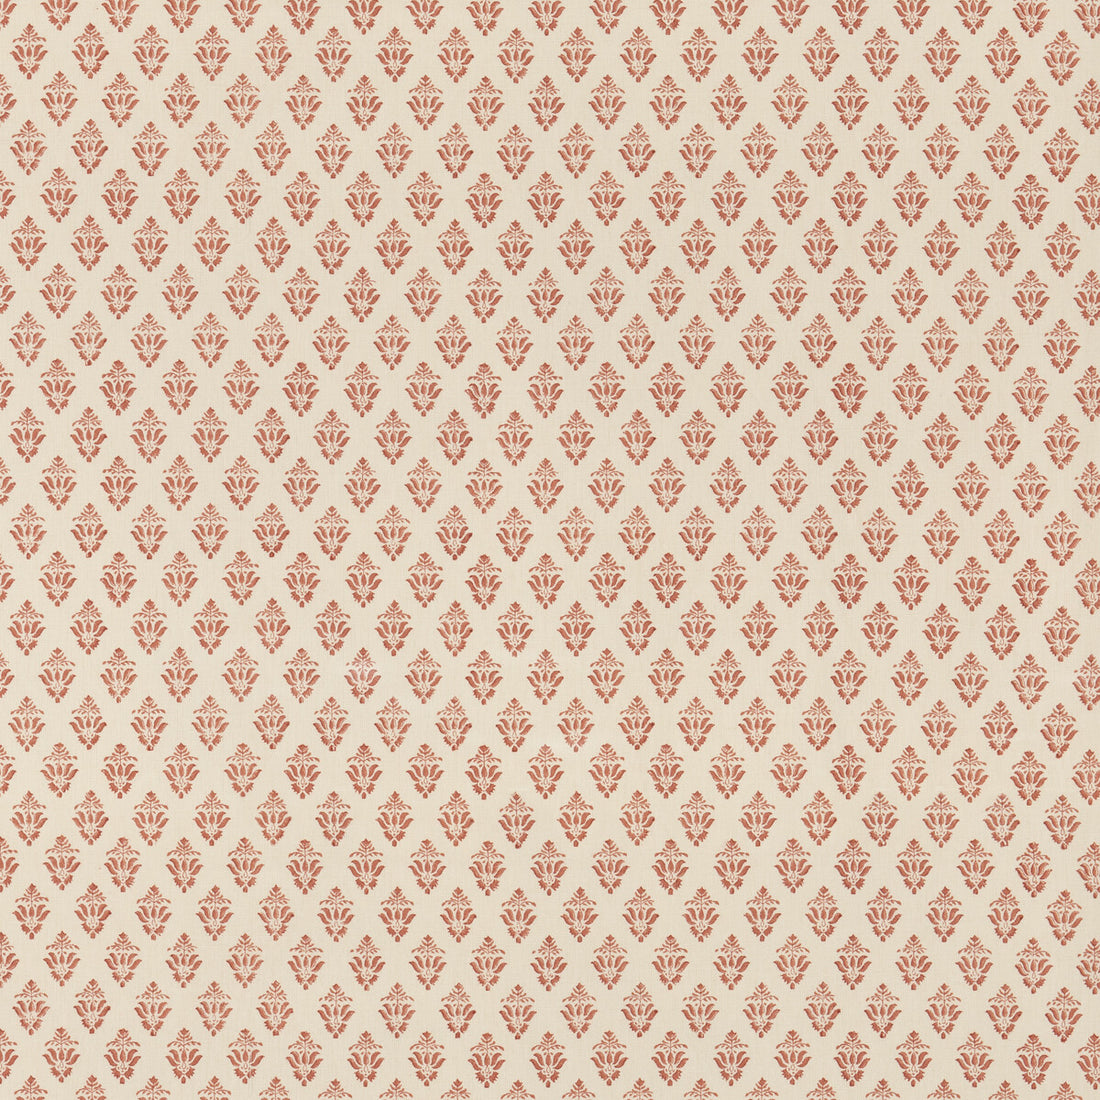 Thornham fabric in spice color - pattern BP10793.3.0 - by G P &amp; J Baker in the Artisan II collection